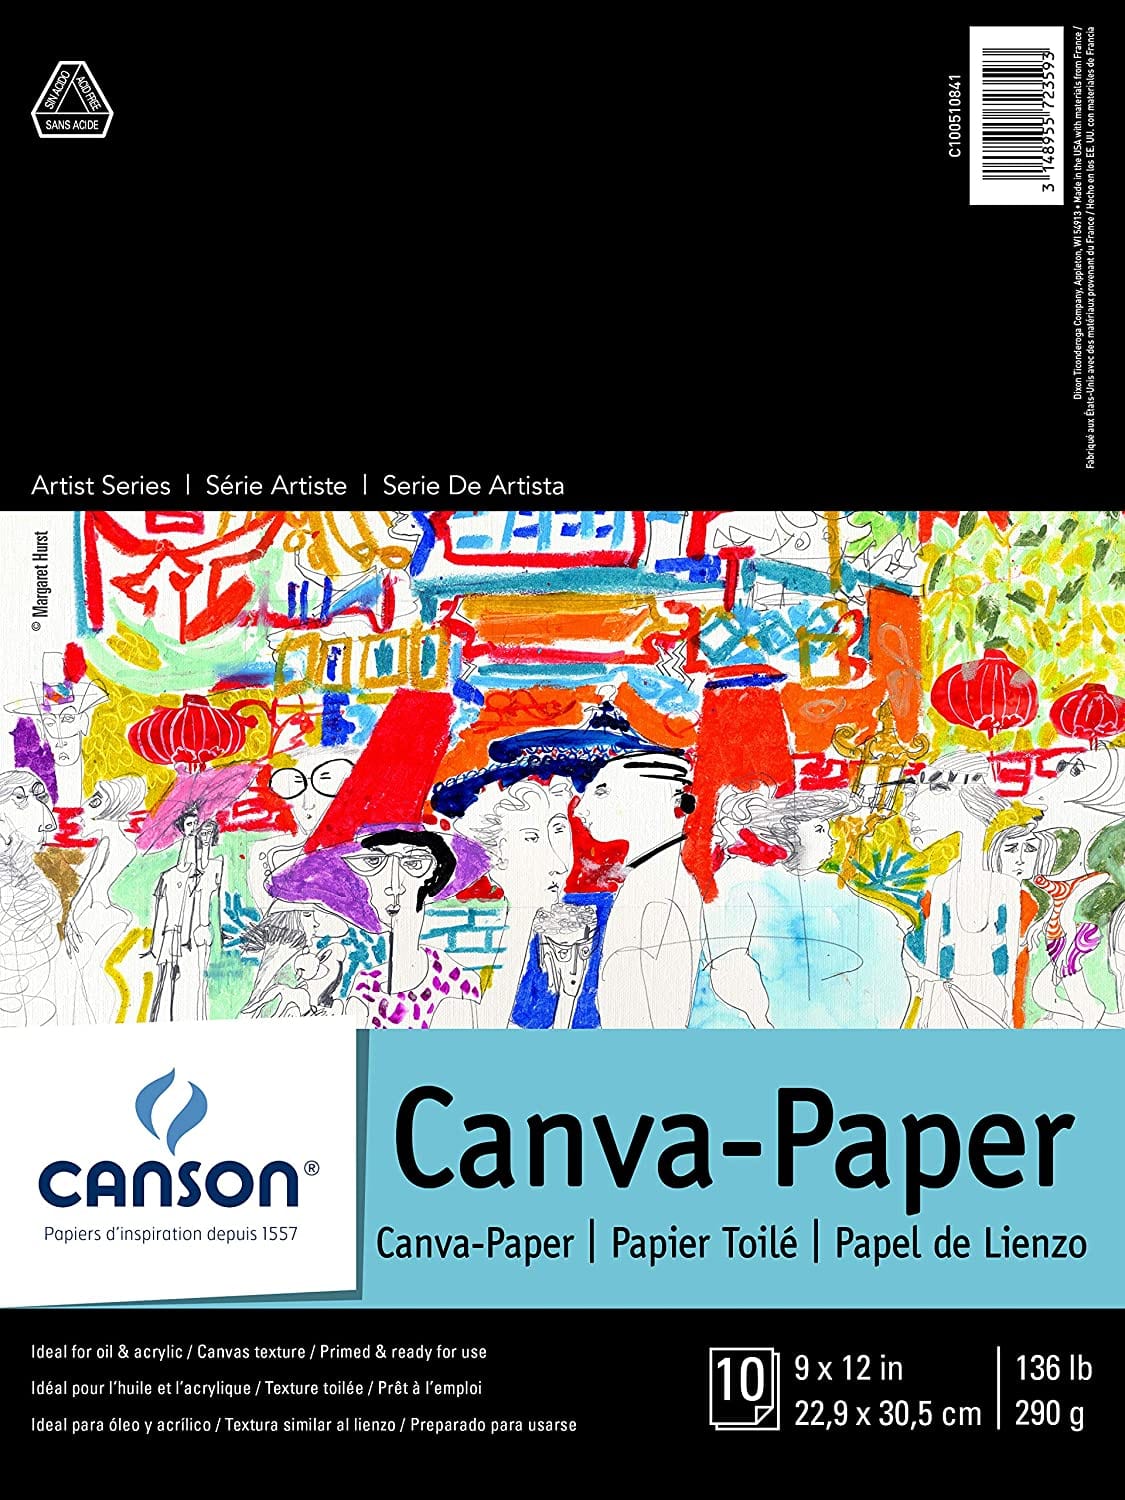 CANSON CANVA PAPER Canson - Canva-Paper Pad - 9x12" - Item #C100510841